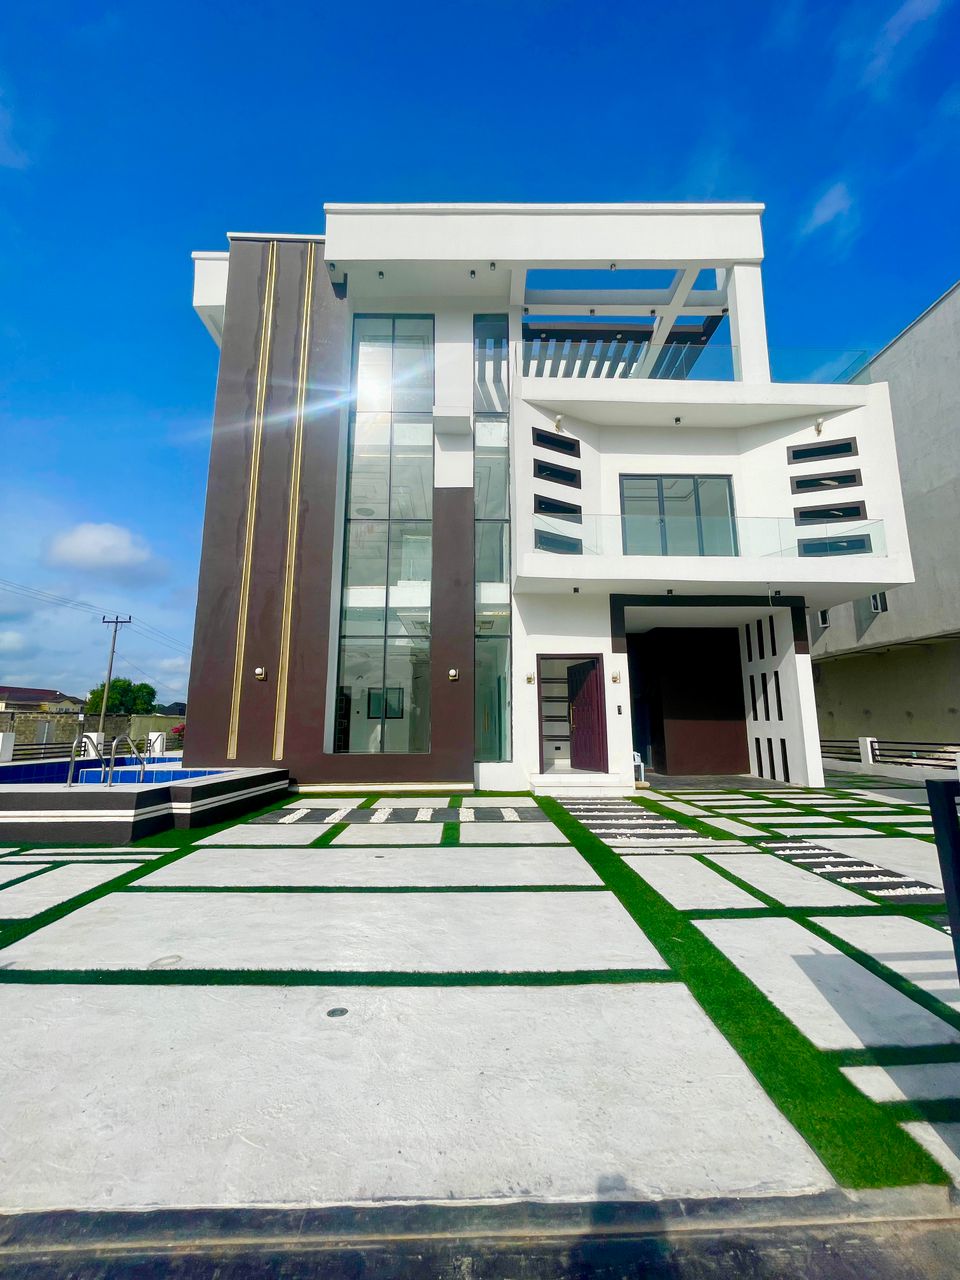 5 BEDROOM FULLY DETACHED DUPLEX + BQ WITH CINEMA AND SWIMMING POOL FOR SALE @OSAPA LEKKI LAGOS